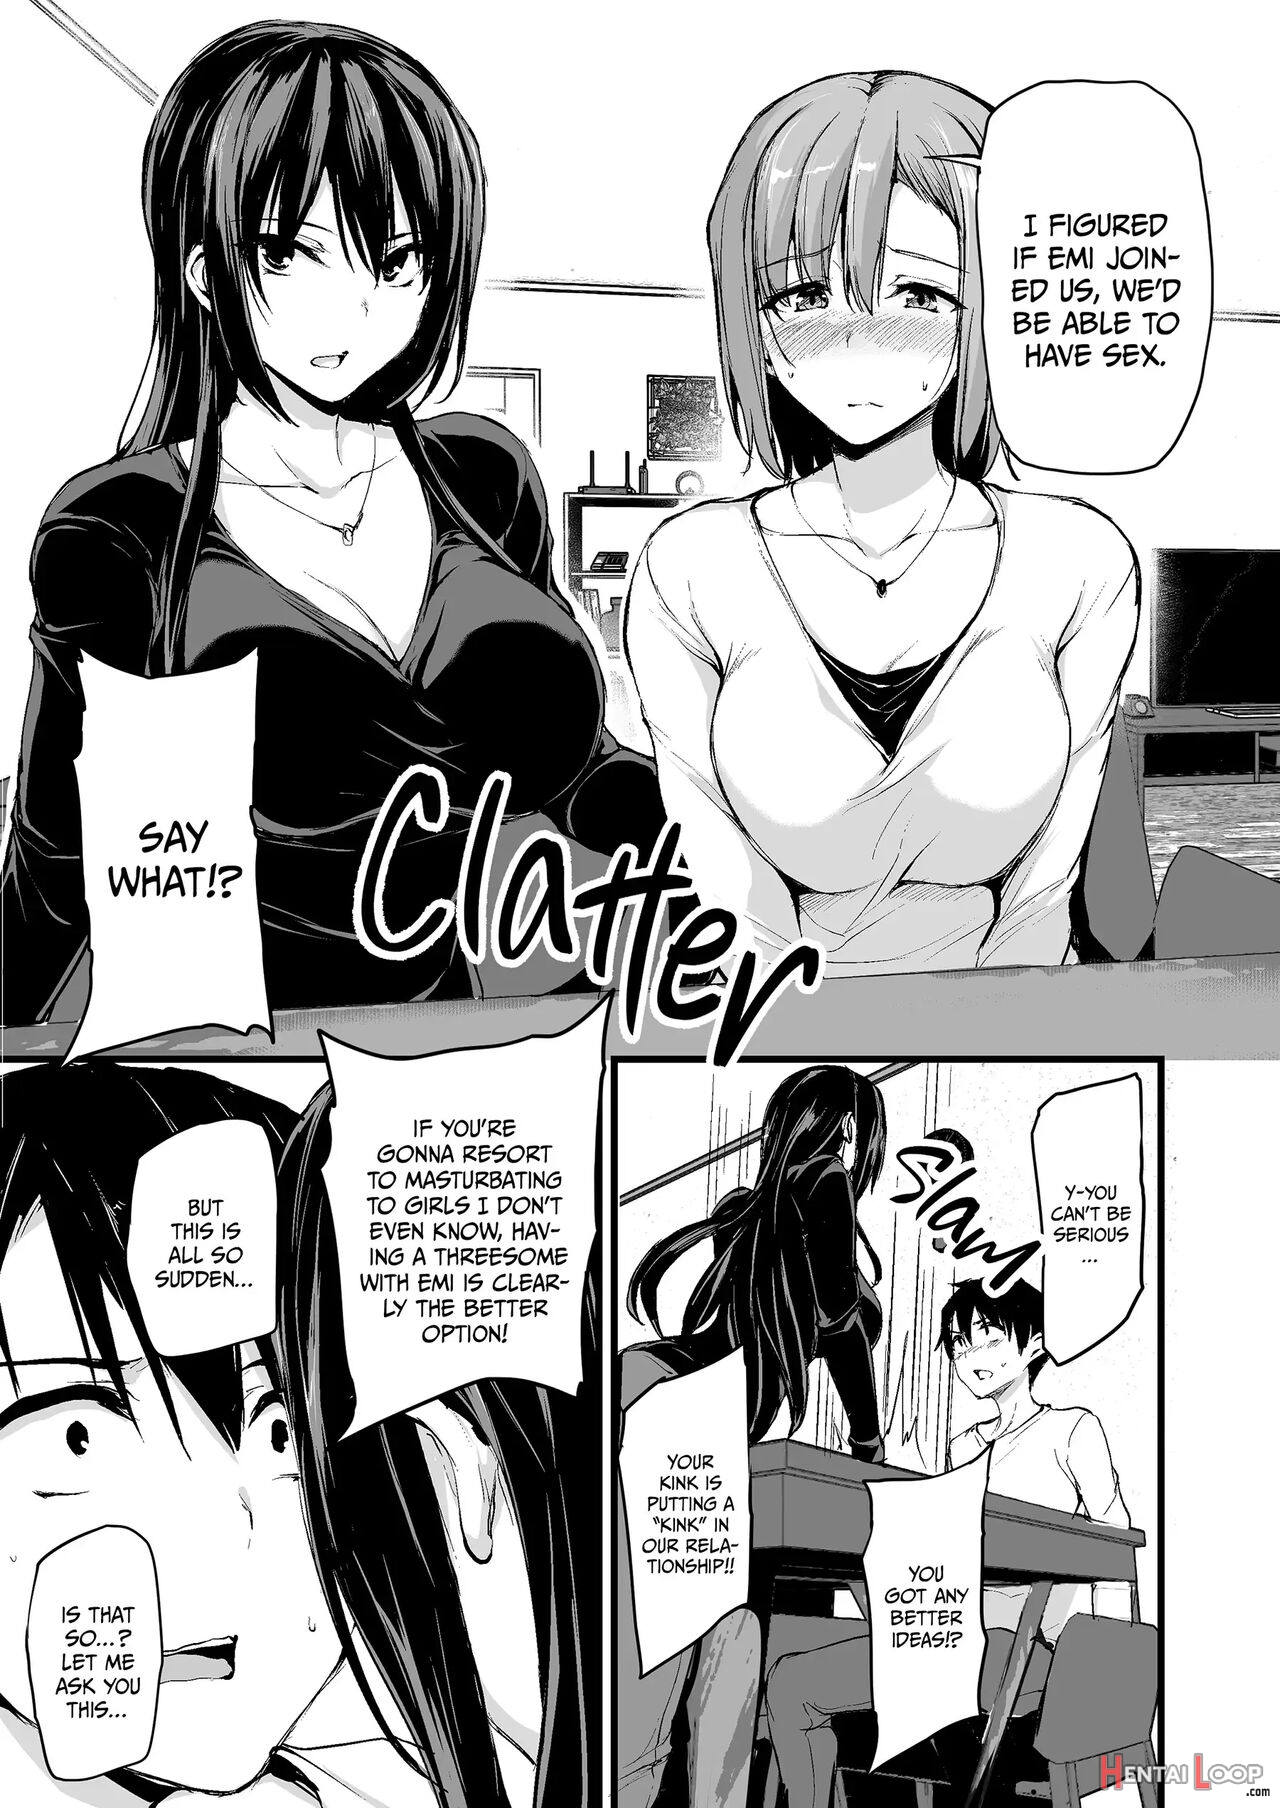 Page 6 of I Cant Get It Up Without Two Pairs Of Big Breast So My Wife Brought Her Friend! (by Tachibana Omina) pic